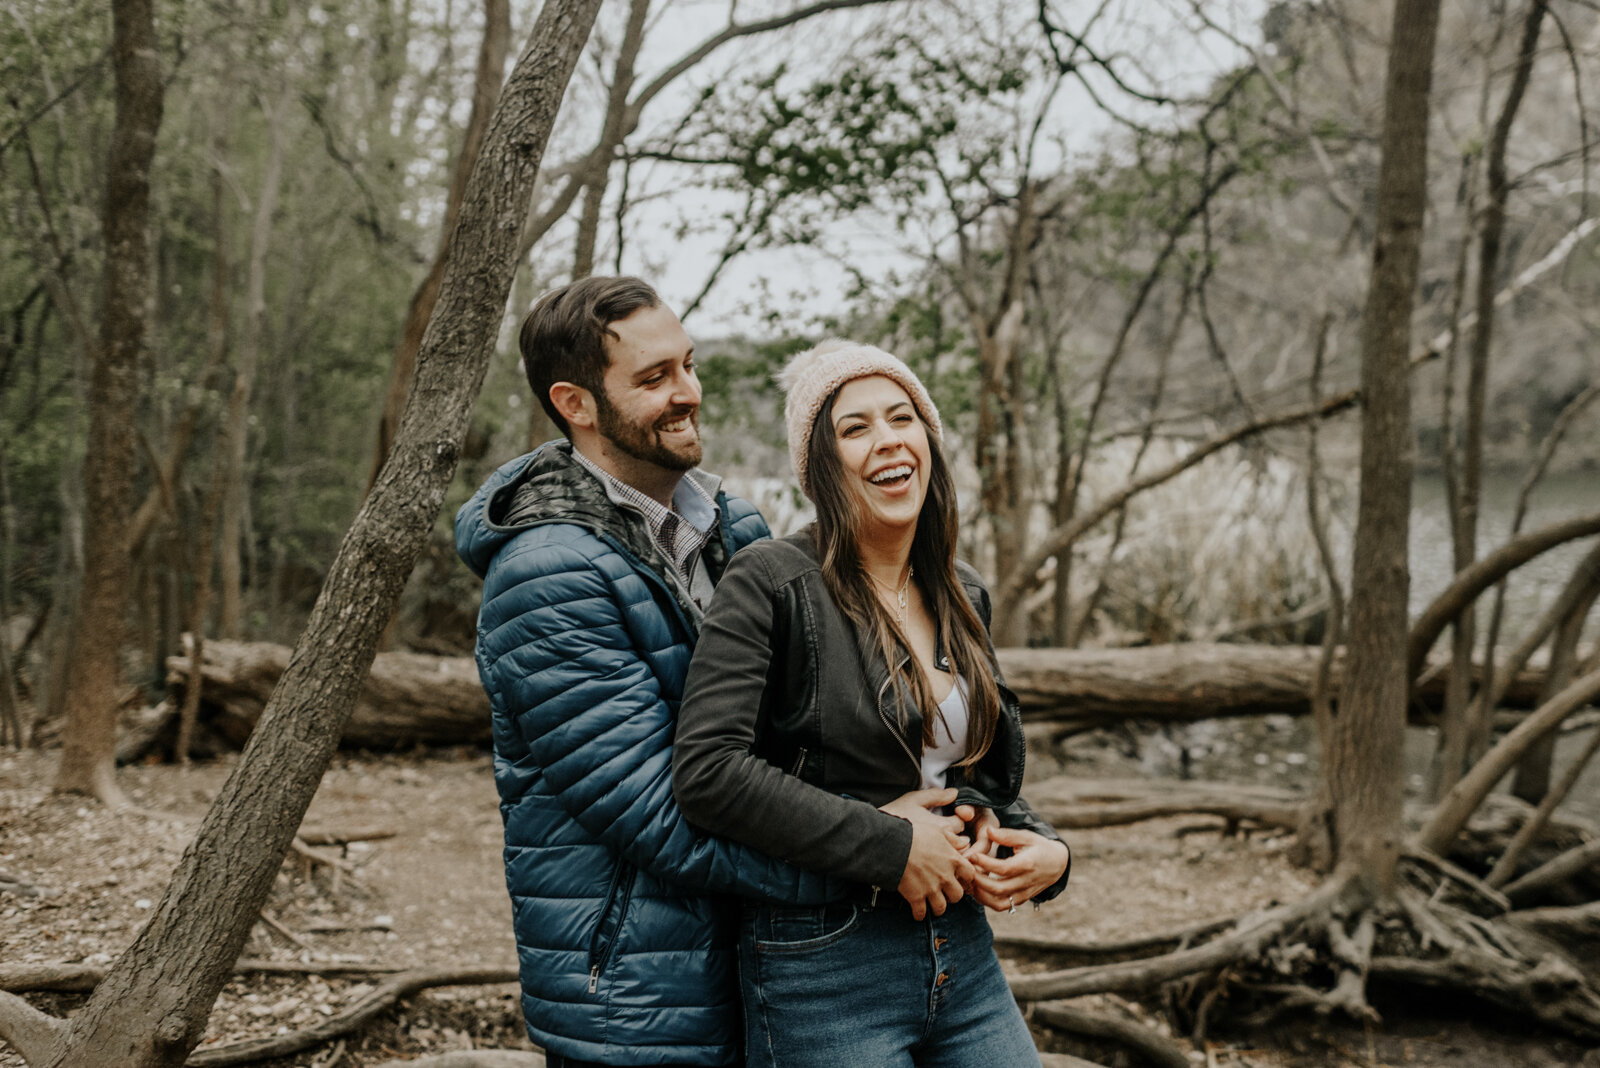 Red Bud Isle in Austin, Texas Cute Dog Engagement Photography